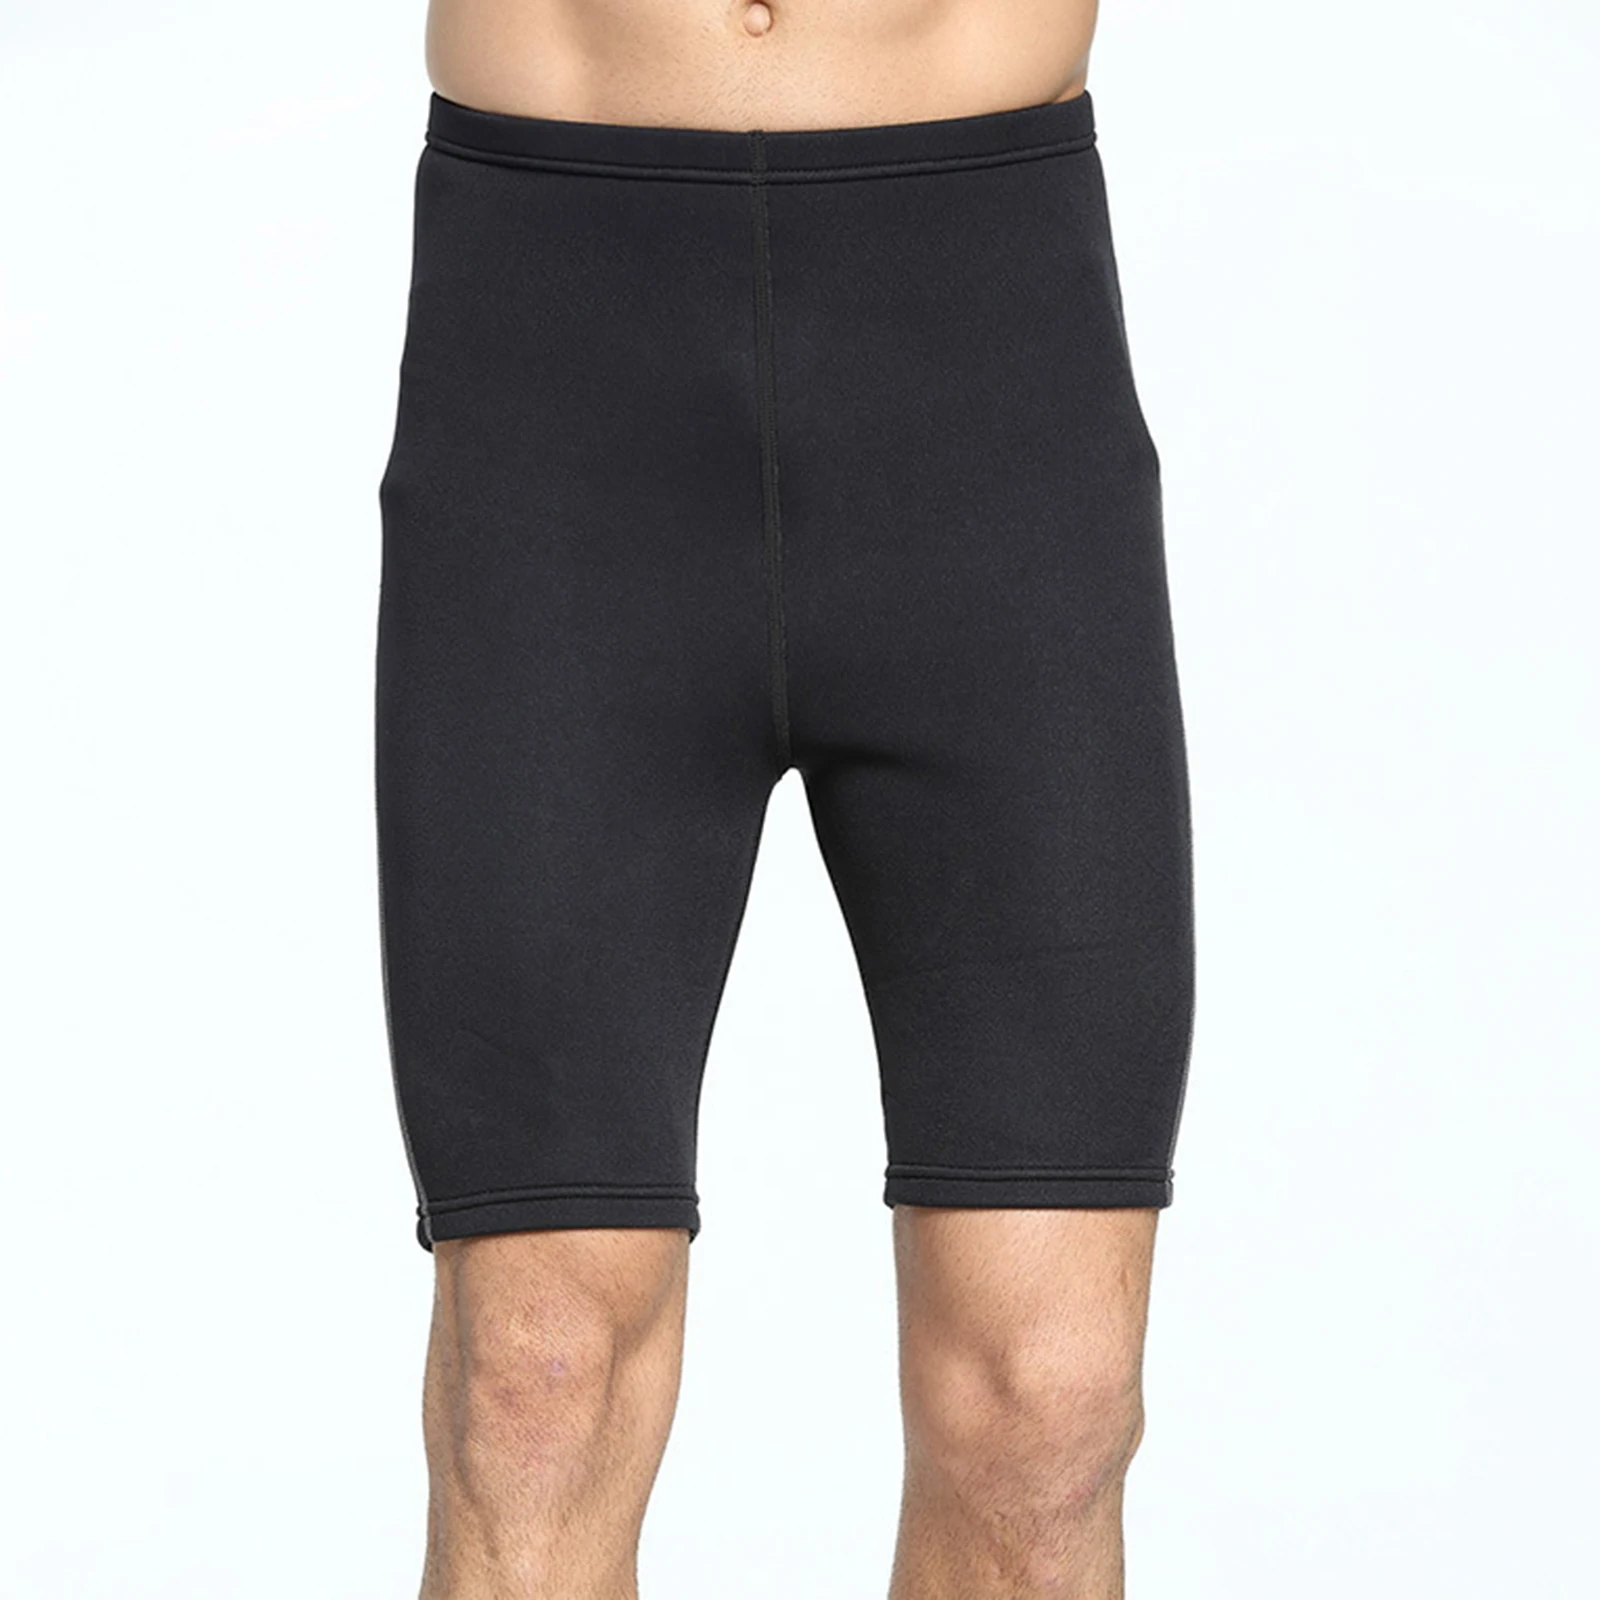 Wetsuits Shorts, Thick Elastic Trunks Water Sport, Diving Swimming Pants, Waterproof Fitness Surf Wetsuit Shorts for Men